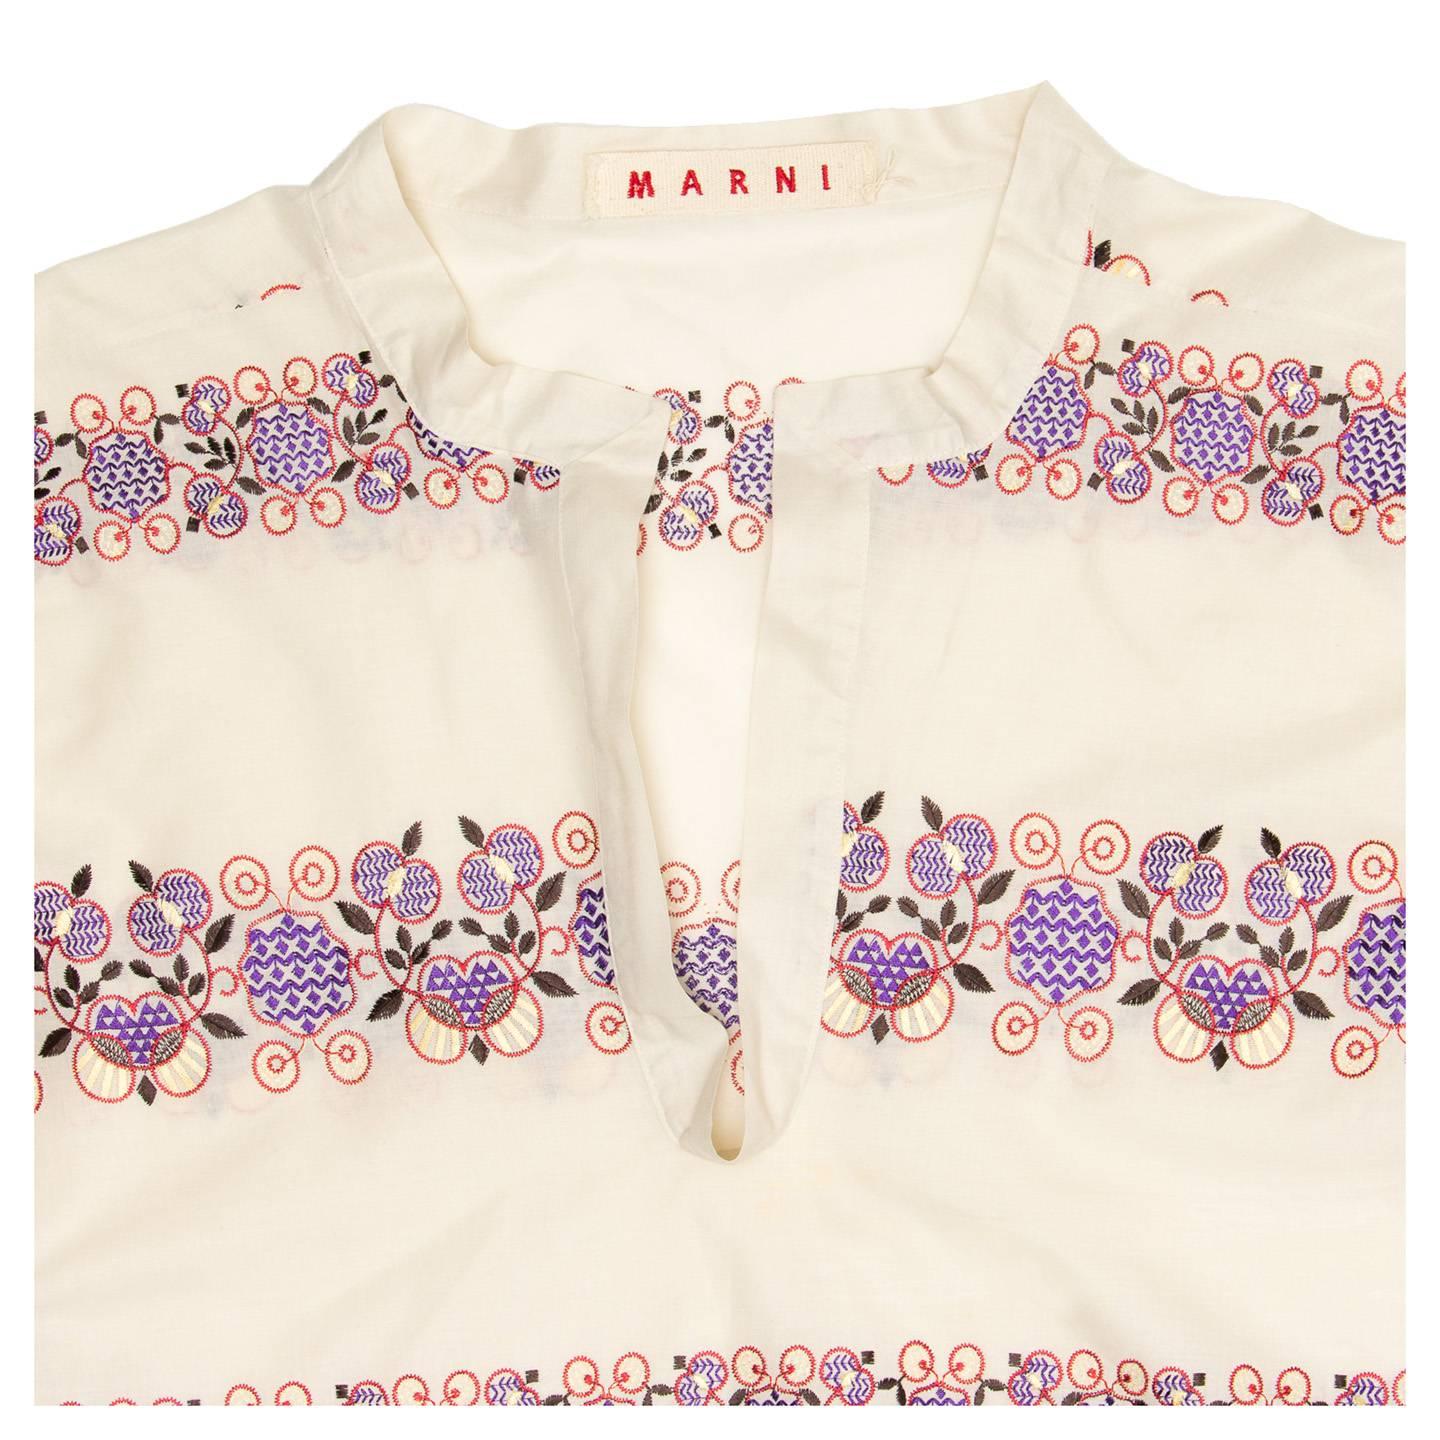 Marni Multicolor Floral Embroideries Tunic In New Condition For Sale In Brooklyn, NY